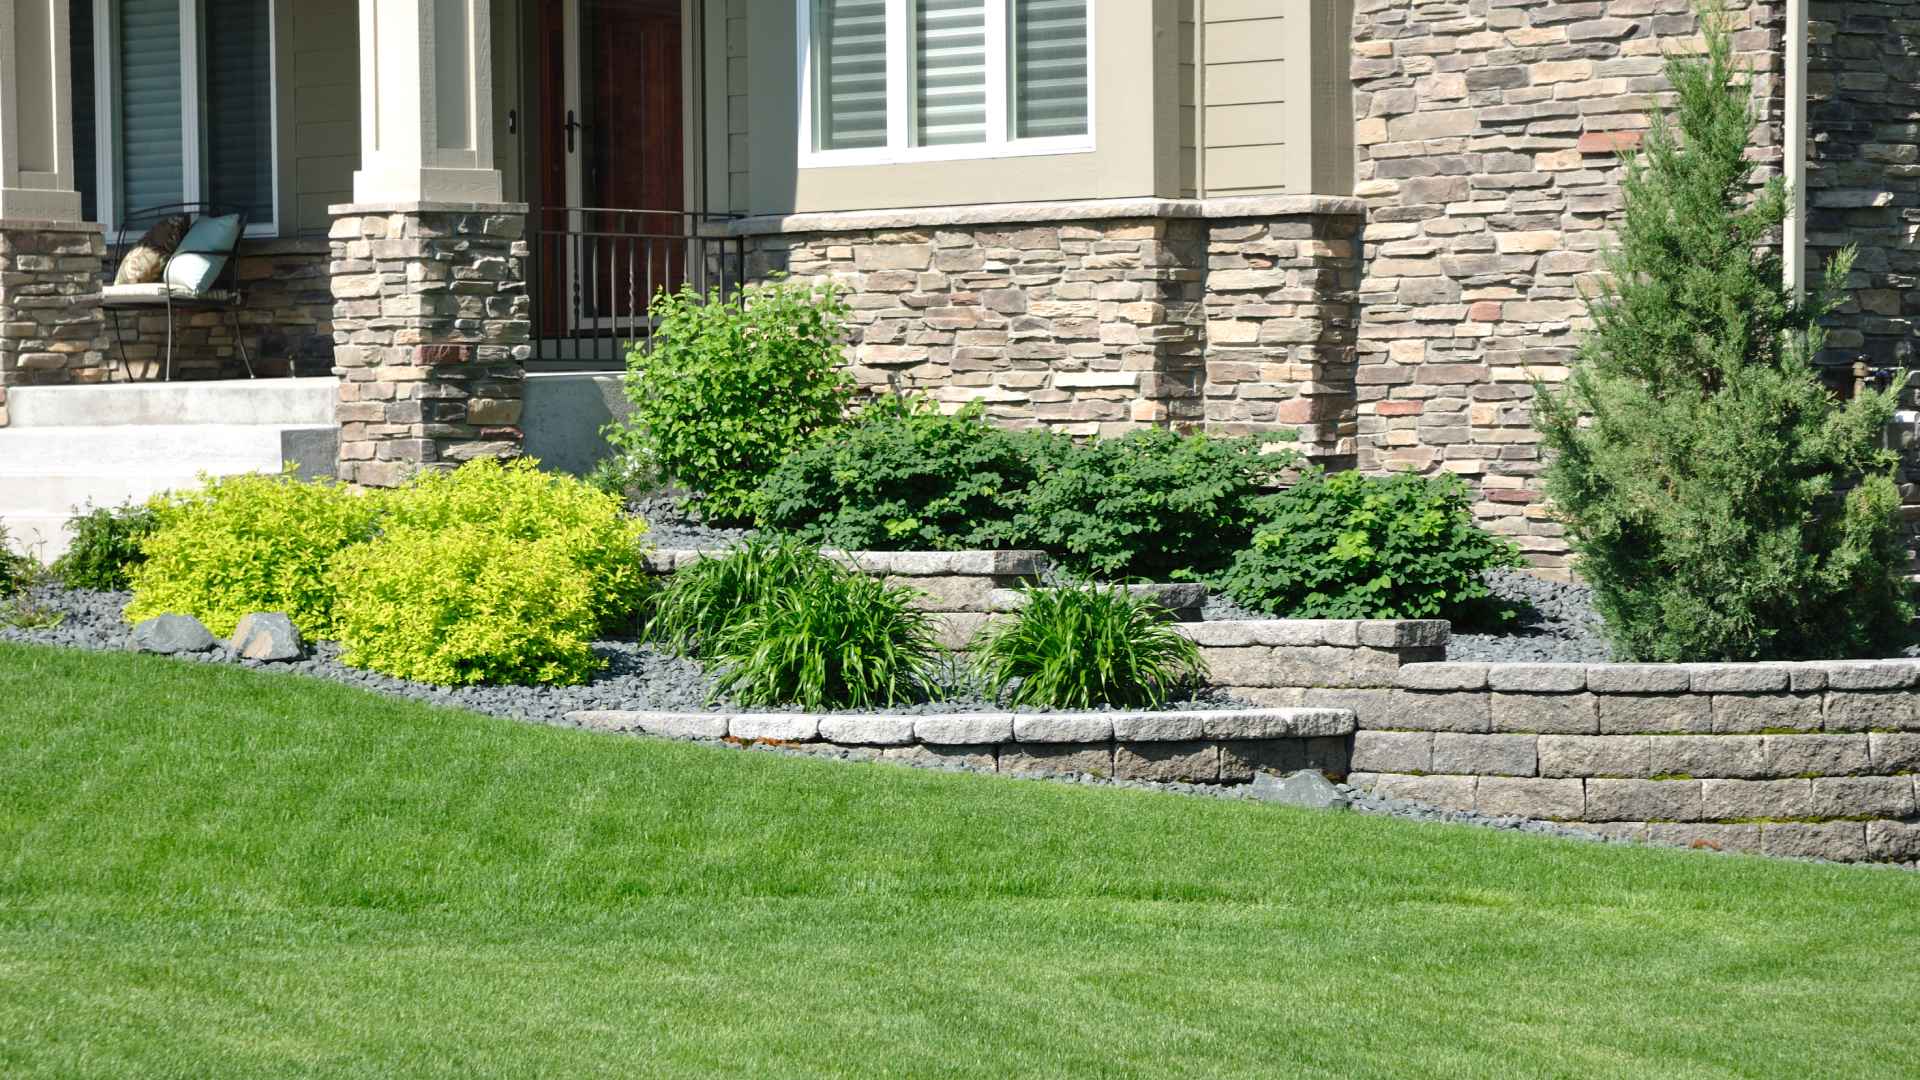 Is Your Property Sloped? A Retaining Wall Is Your Solution!